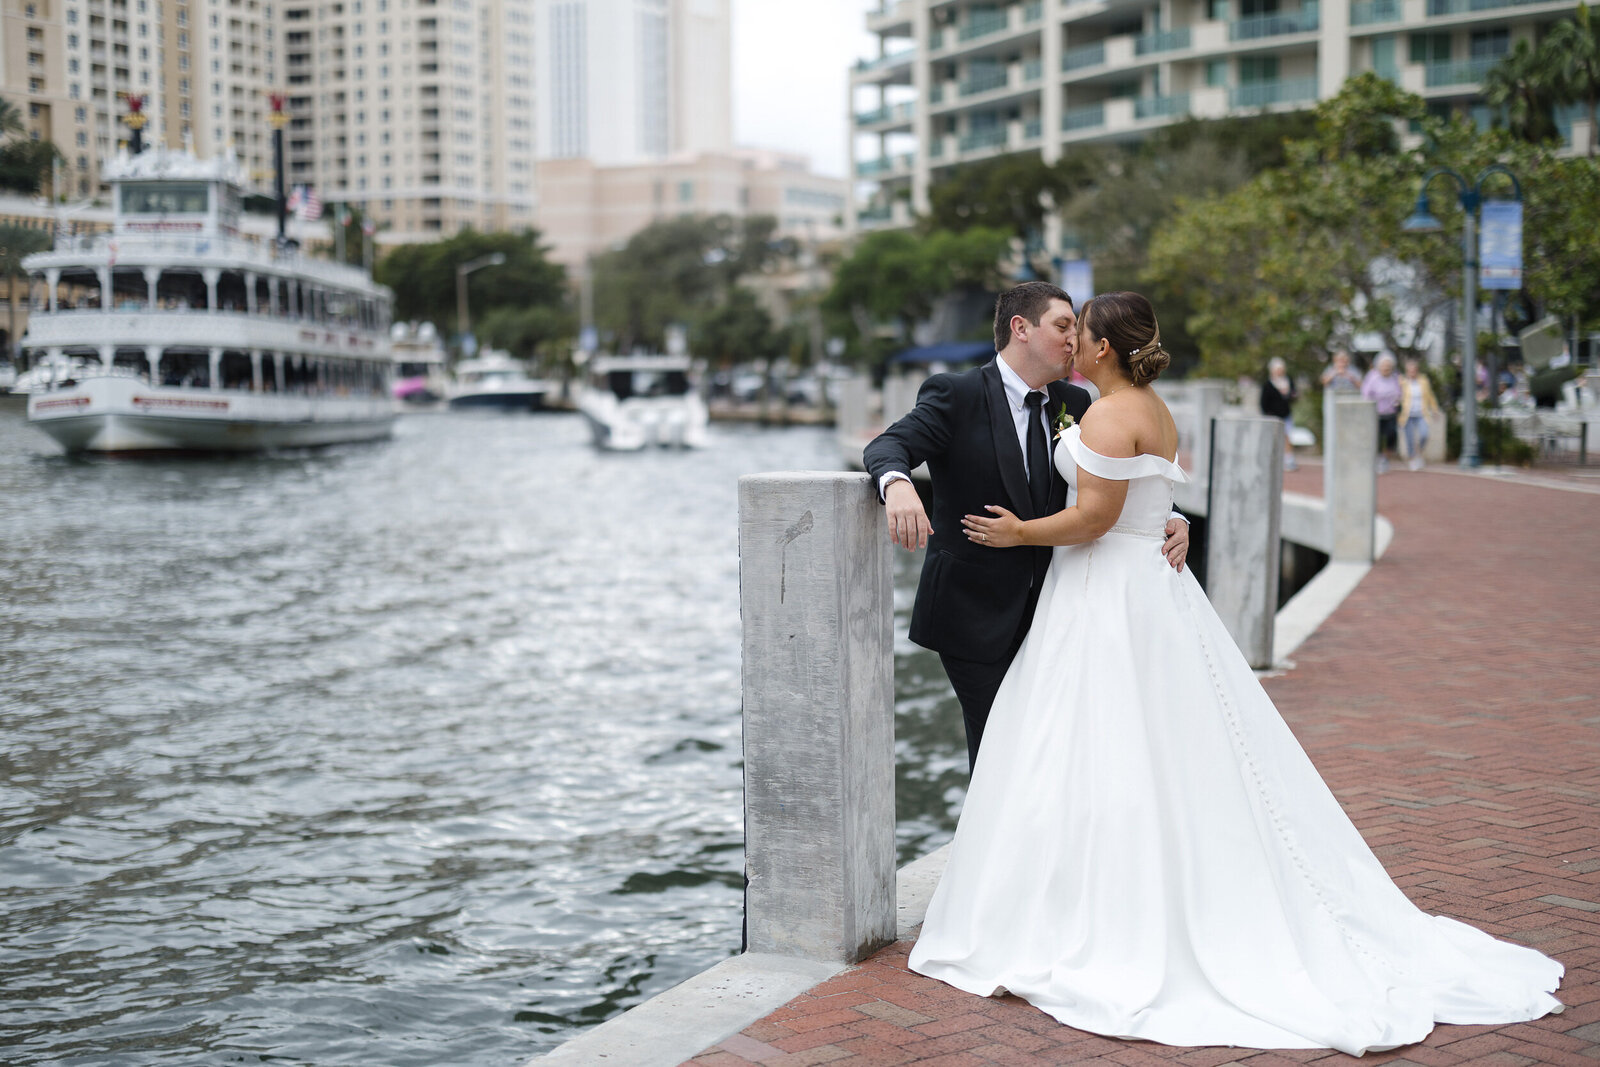 Located on Las Olas Boulevard, the hotel offers a stunning waterfront location that is perfect for wedding ceremonies and receptions.